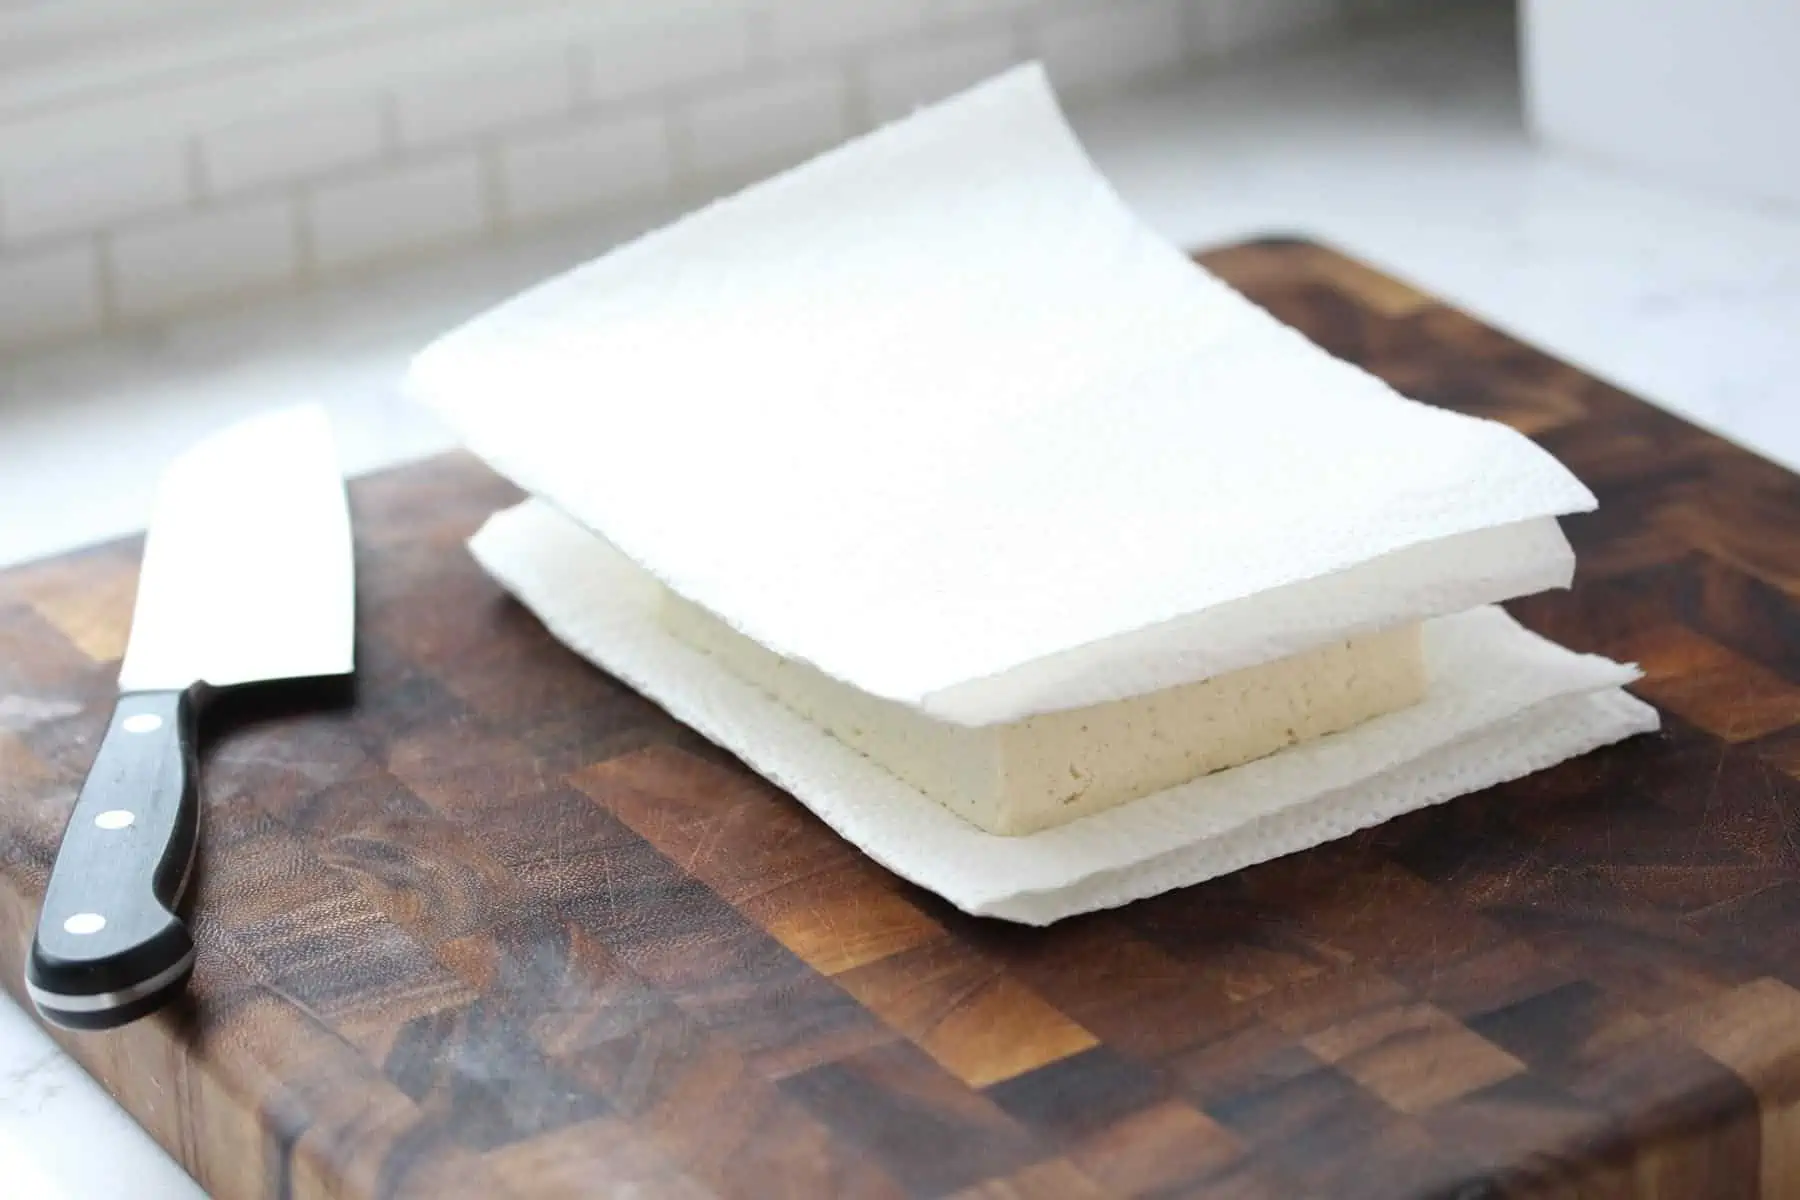 Tofu wrapped in paper towels on cutting board.